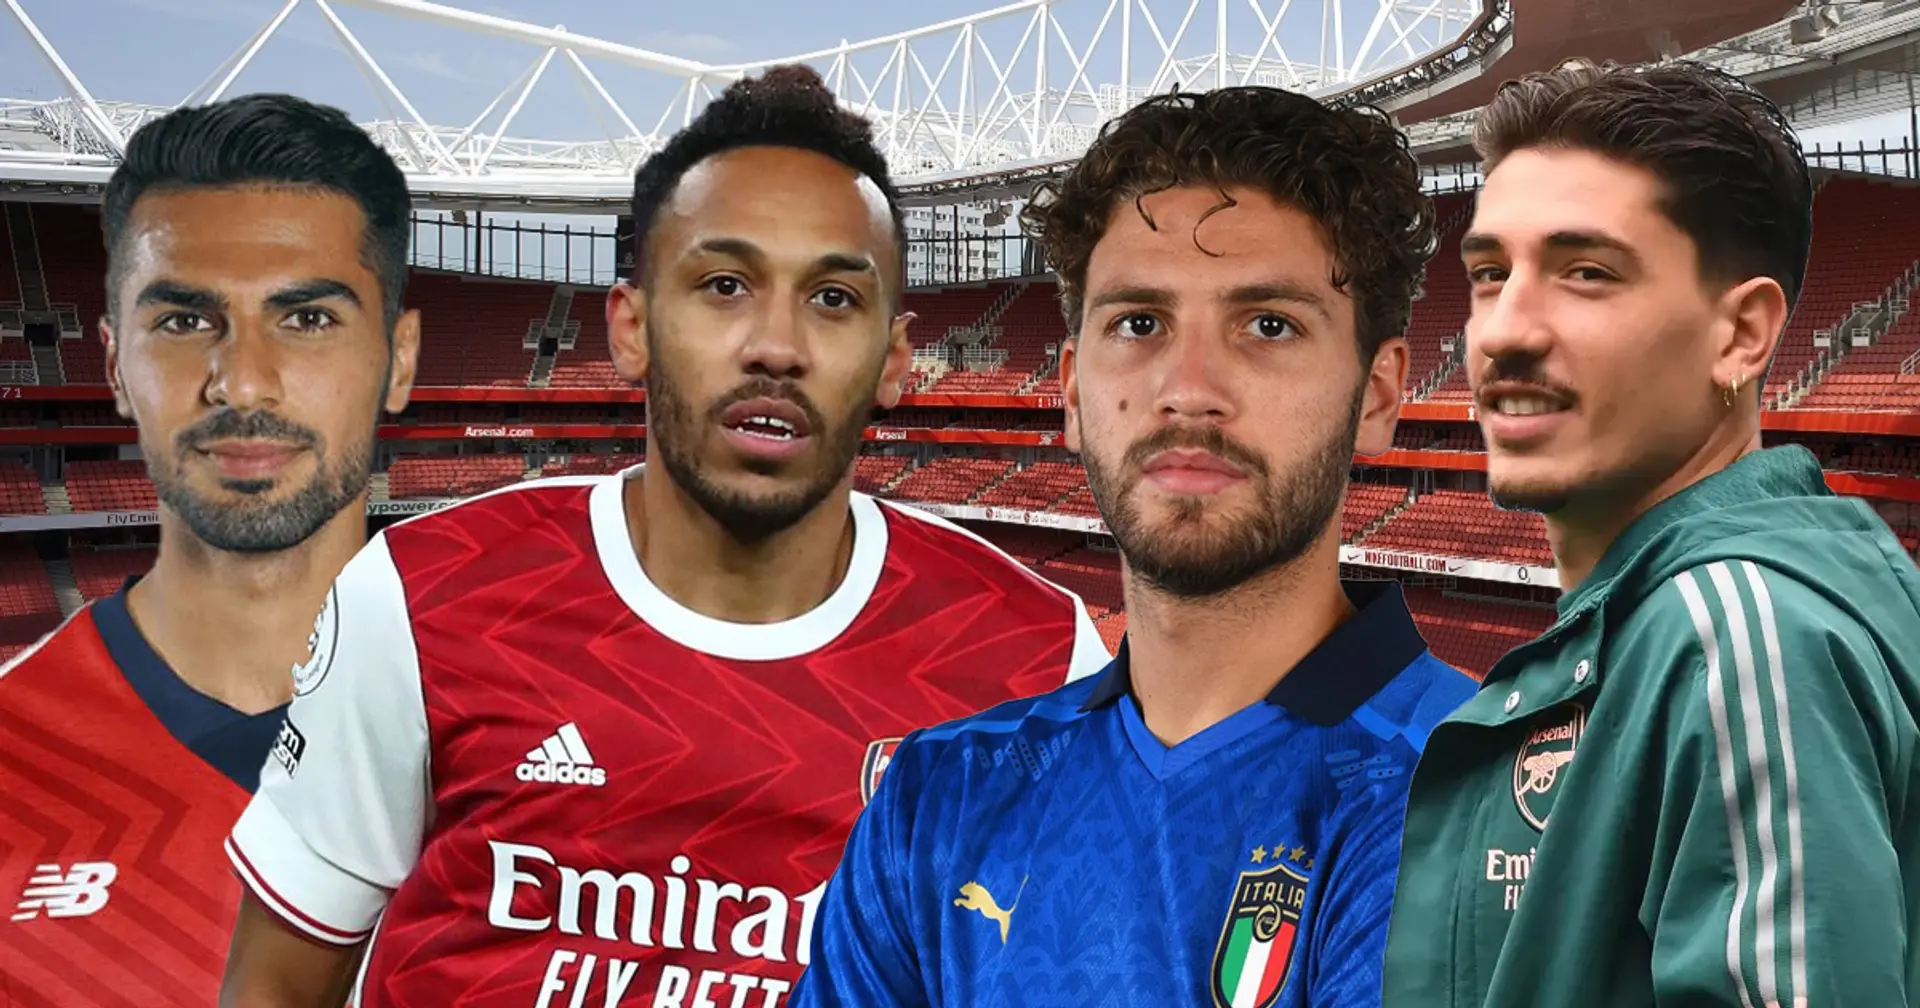 €40m bid for Locatelli, Ligue 1 winner to replace Bellerin: latest Arsenal transfer round-up with probability rankings